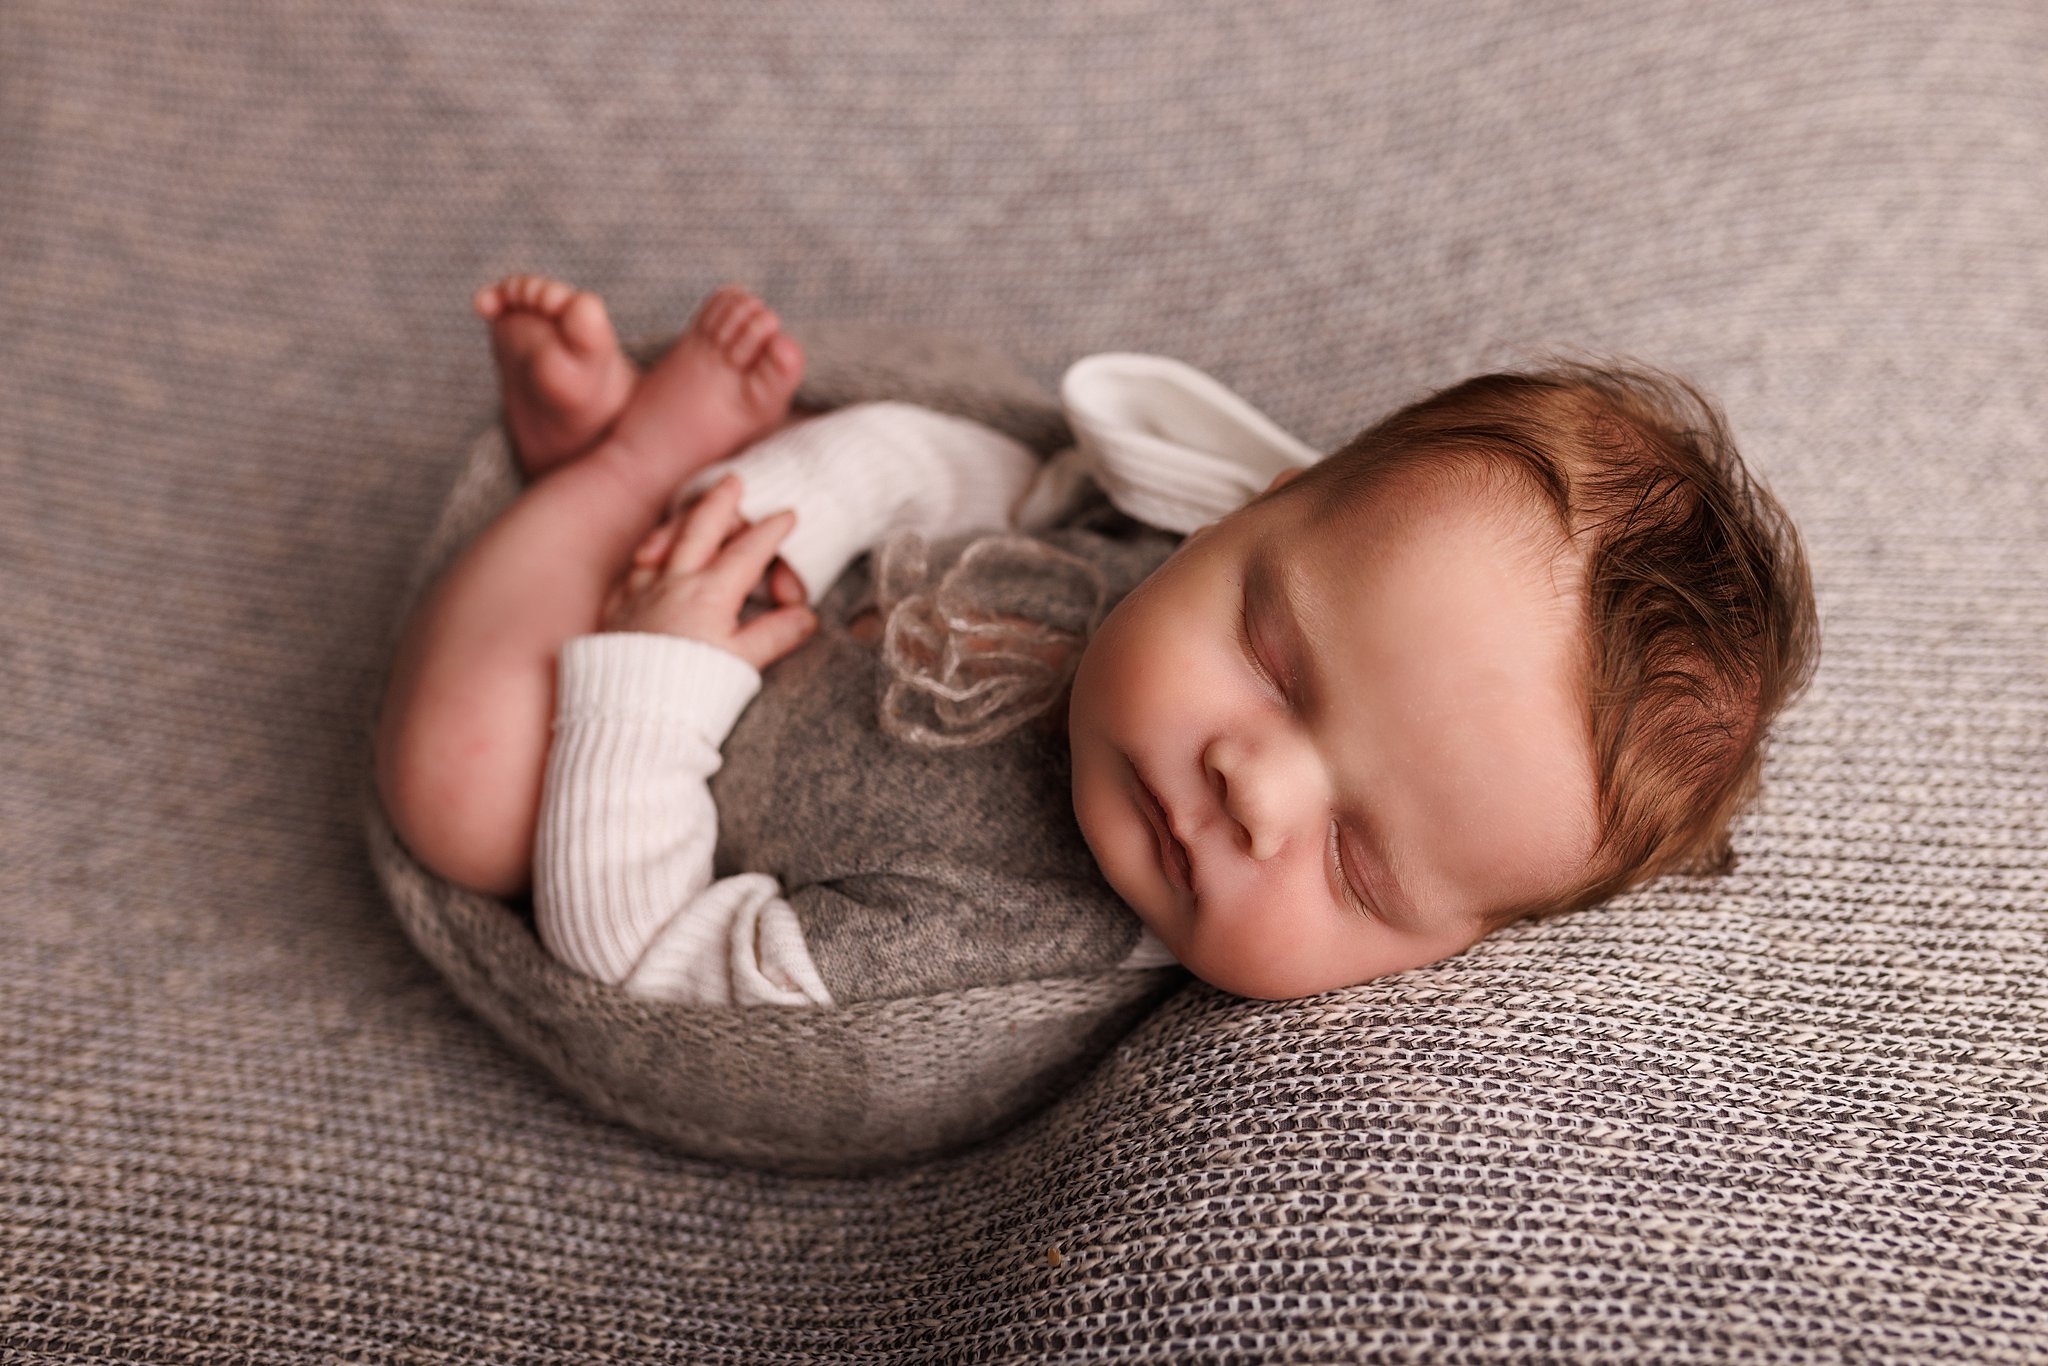 A newborn baby boy wearing a grey and white sweater sleeps on a grey blanket Toronto baby clothes